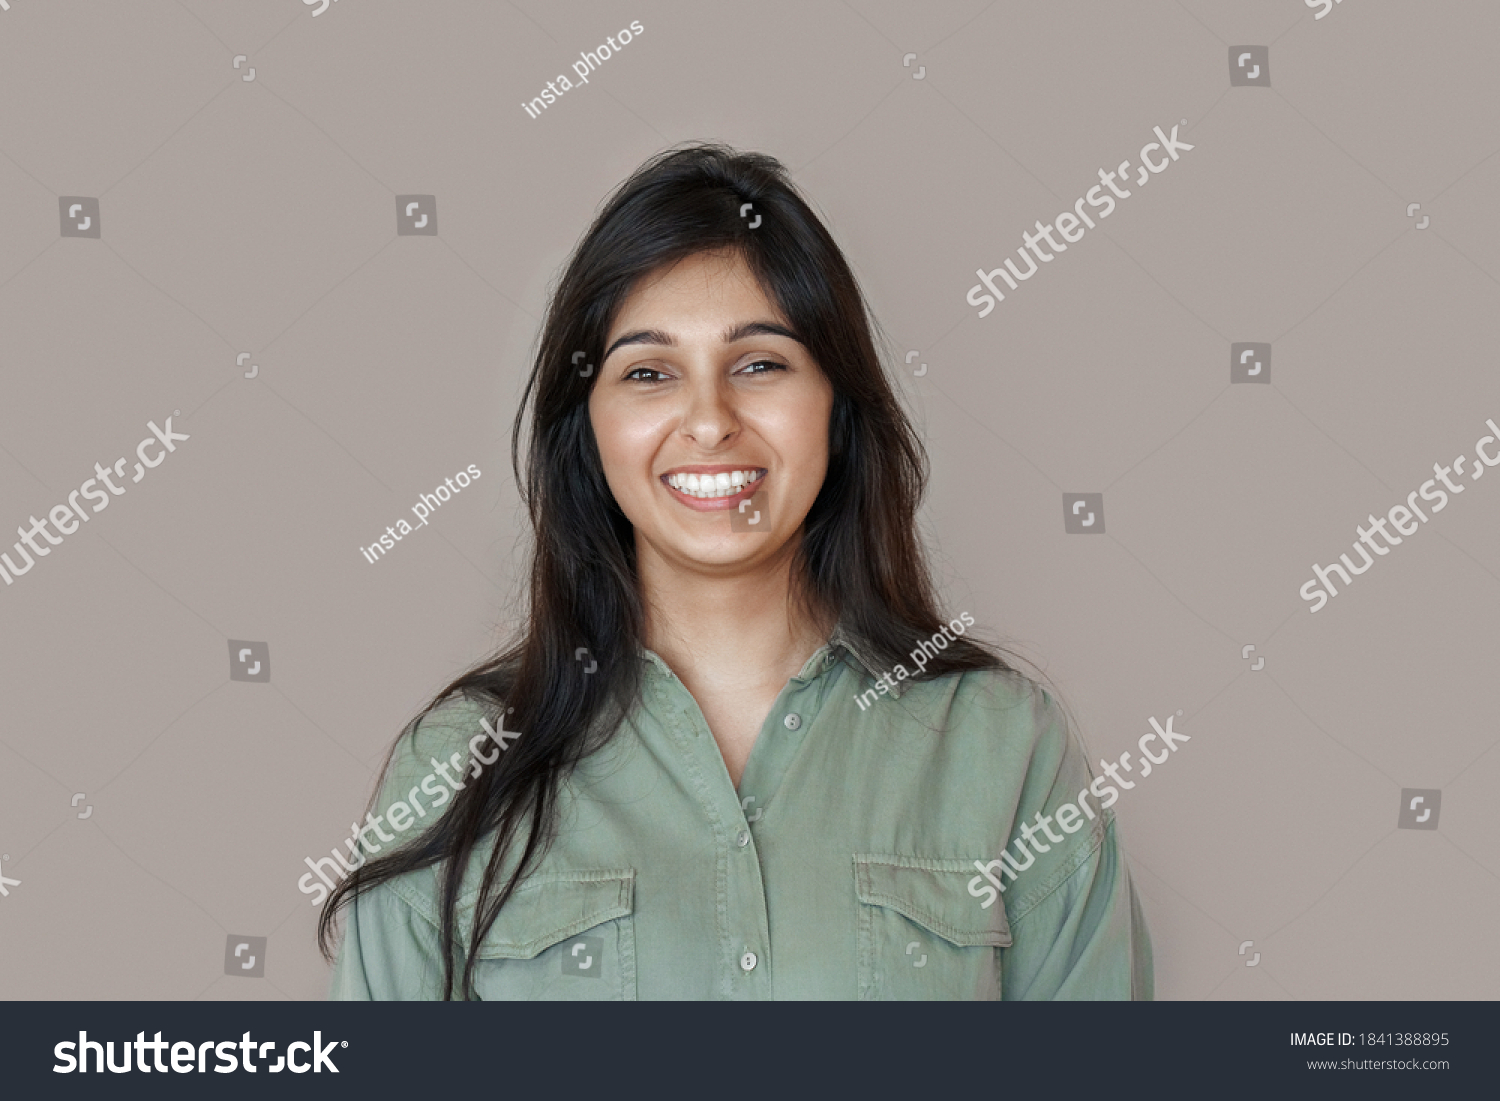 Smiling cheerful young adult indian woman looking at camera, happy pretty funny lady model laughing, feeling positive emotion standing isolated on brown background, face front headshot portrait. #1841388895